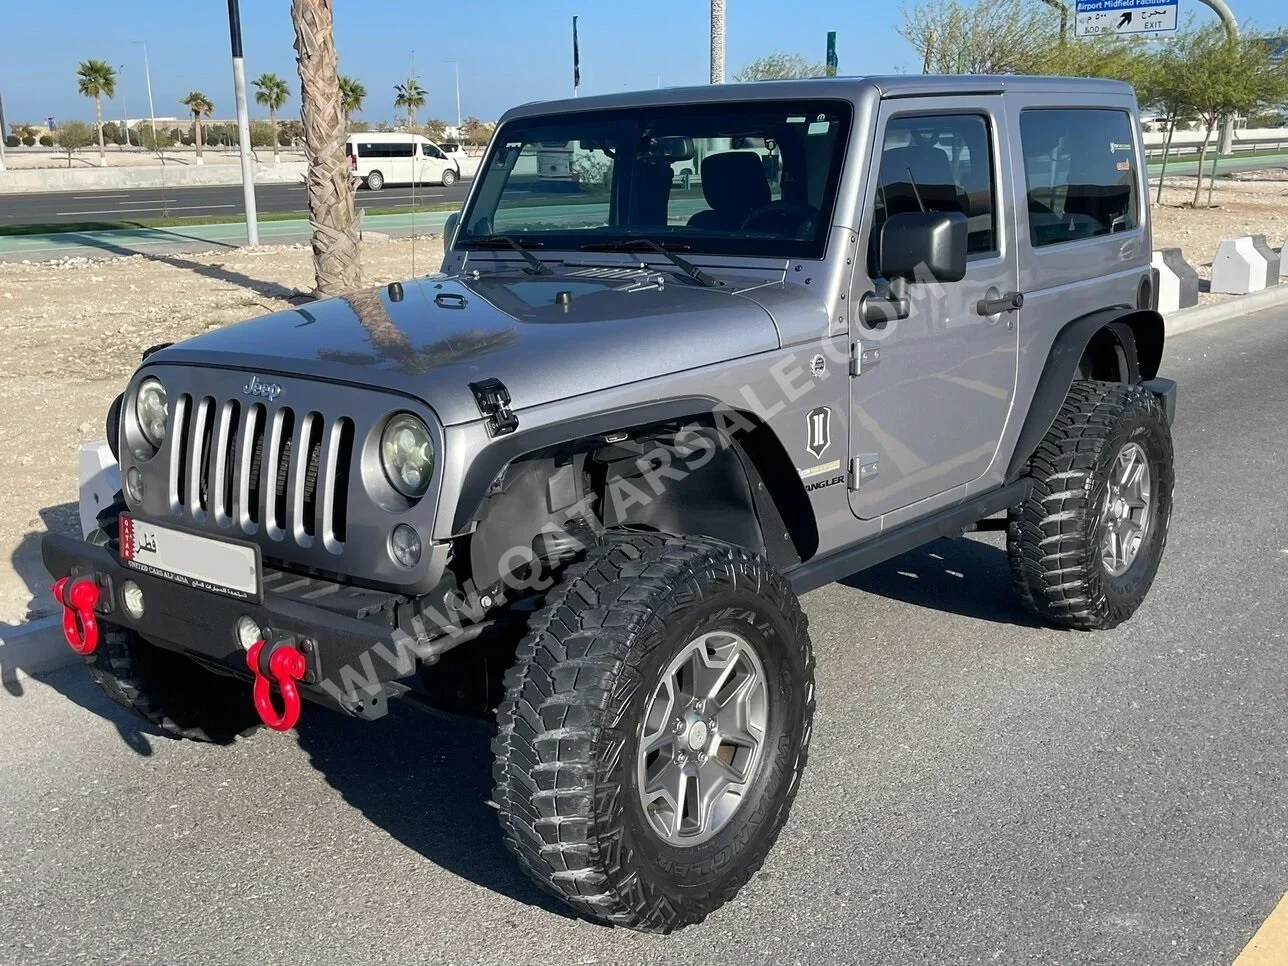 Jeep  Wrangler  Rubicon  2014  Automatic  114,000 Km  6 Cylinder  Four Wheel Drive (4WD)  SUV  Silver